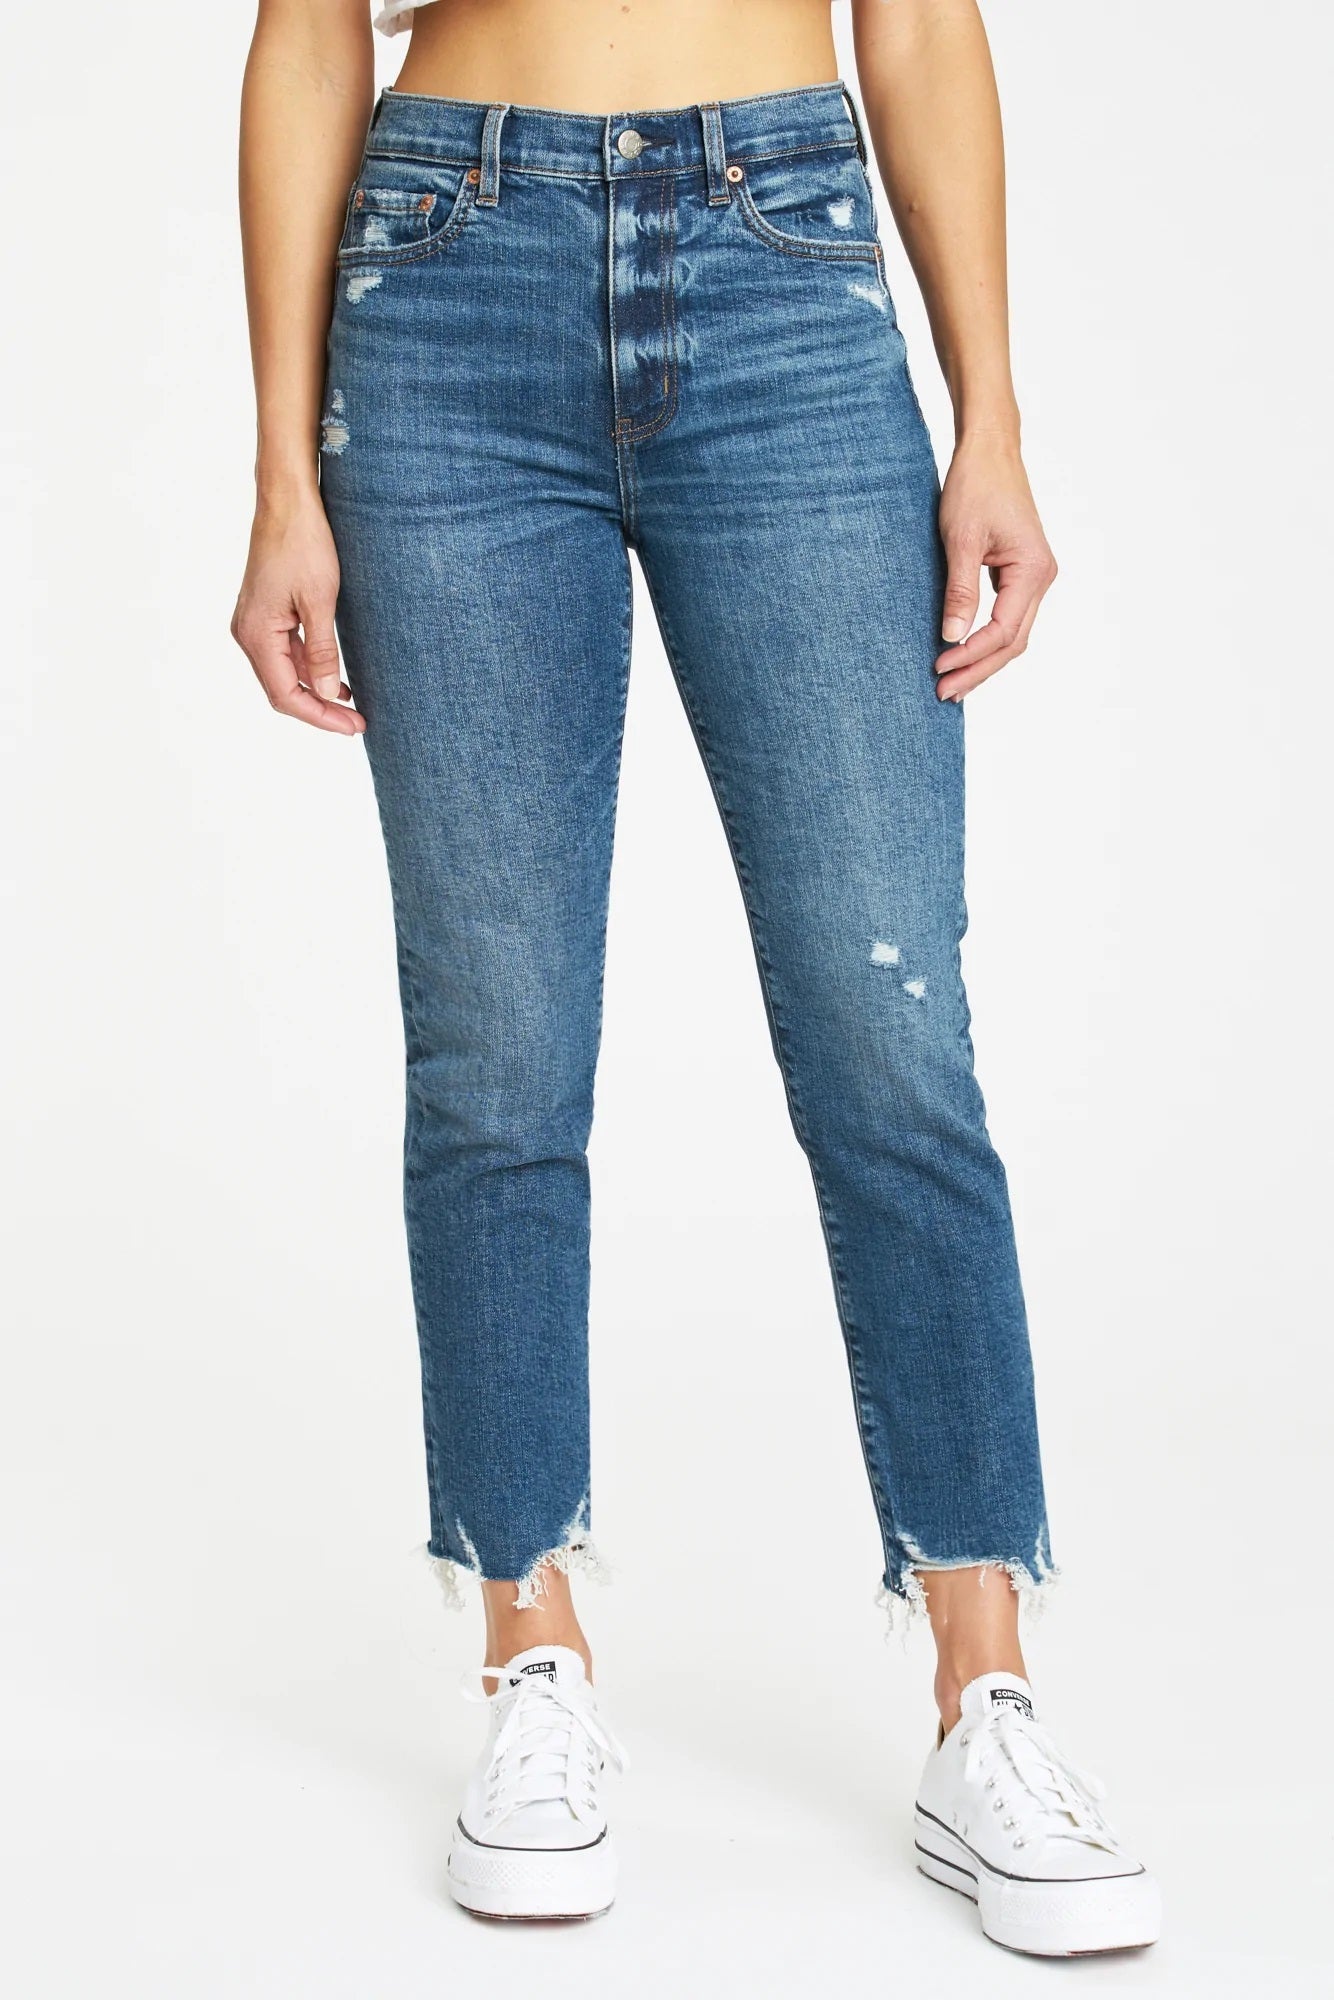 Daze, Daily Driver High Rise Skinny Straight in A Plus - Boutique Dandelion